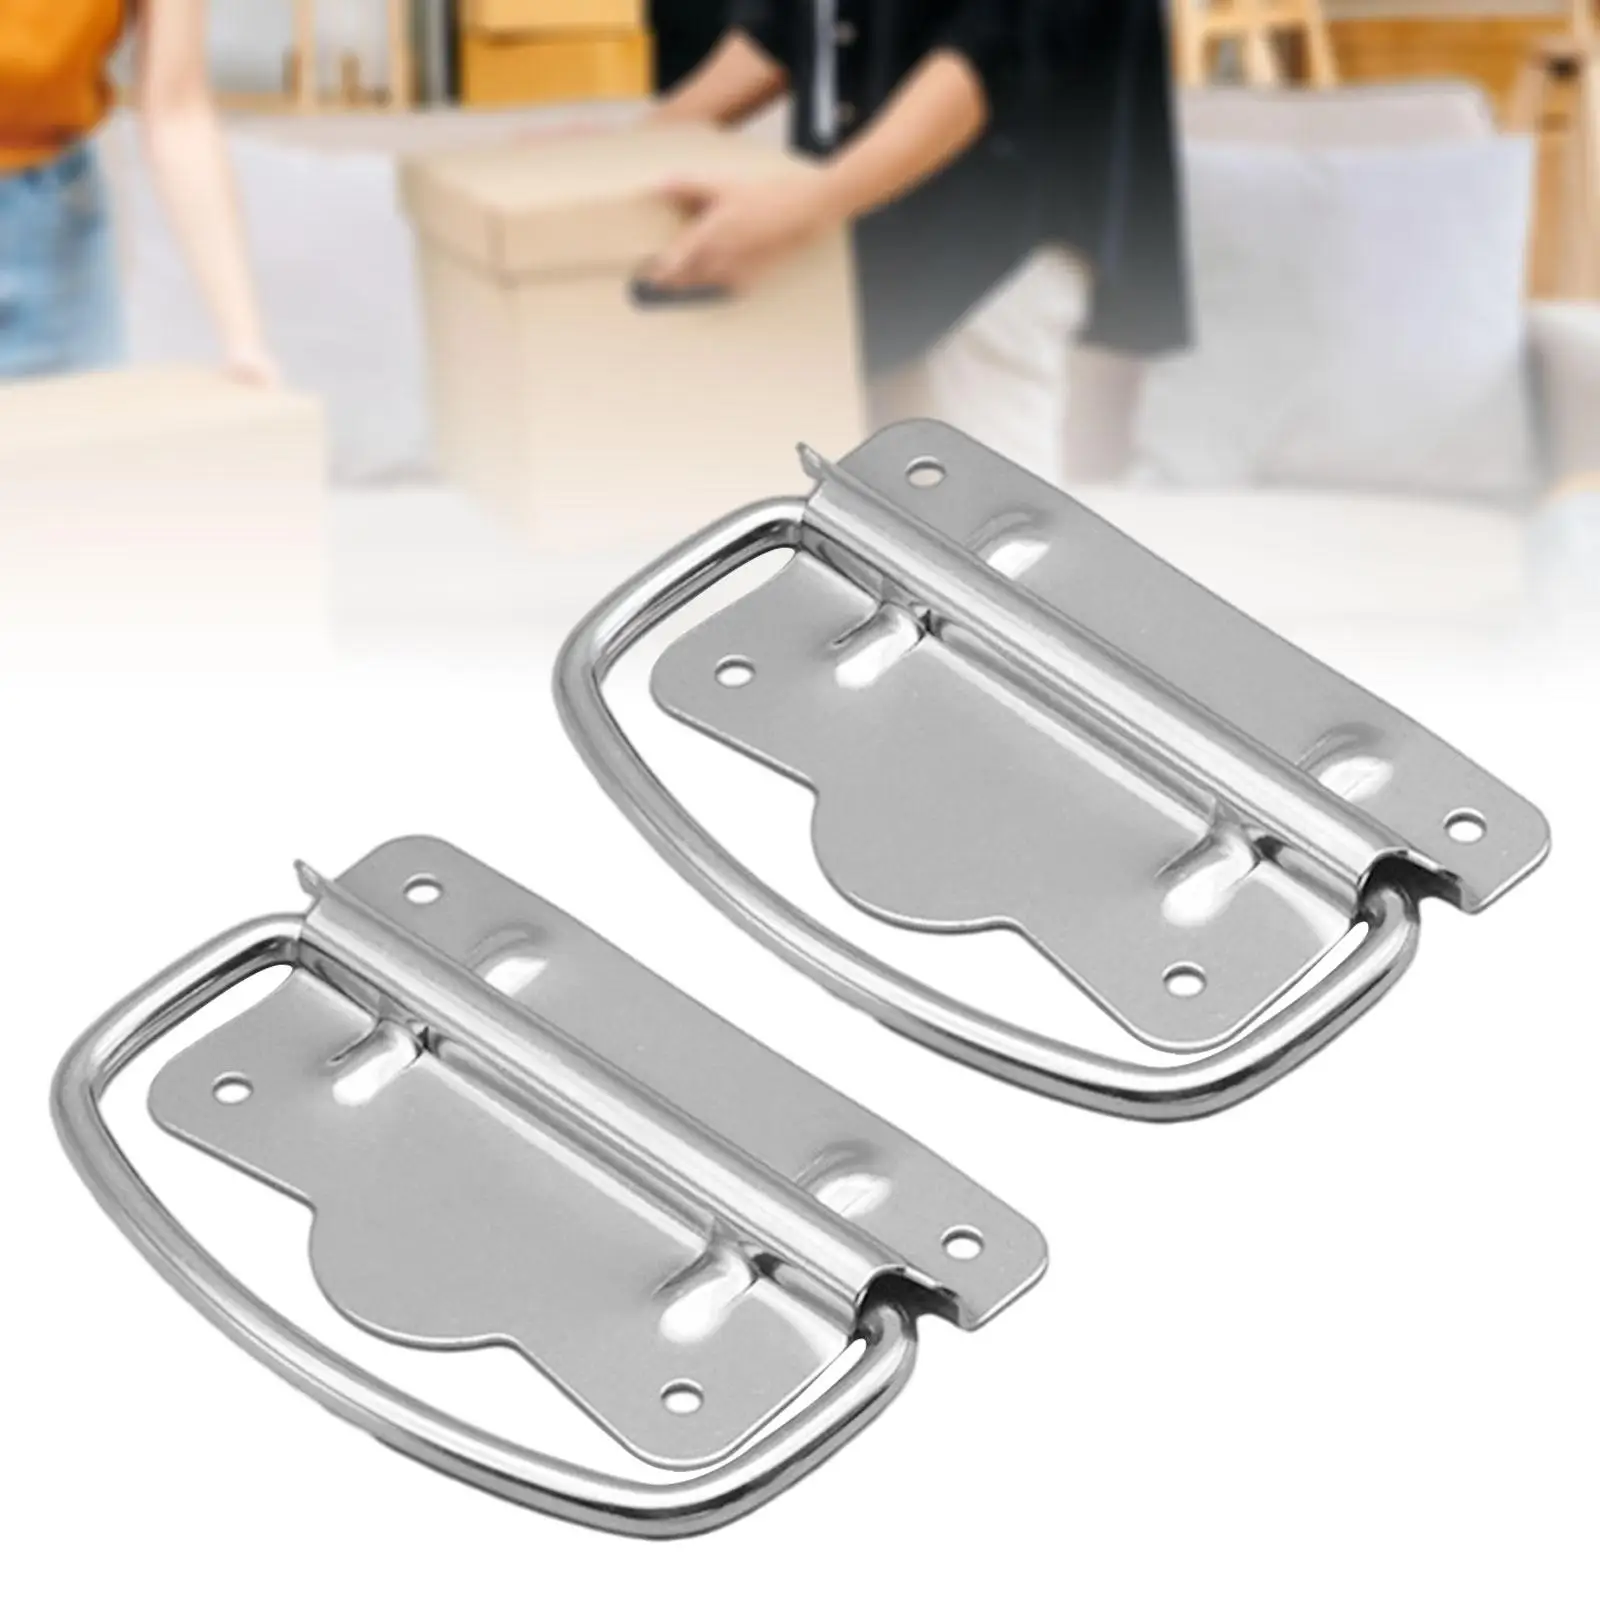 2x Stainless Steel Folding Pull Handles Heavy Duty Pull Rings Handle for Drawers Furniture Dresser Wooden Box Lifting Door Chest